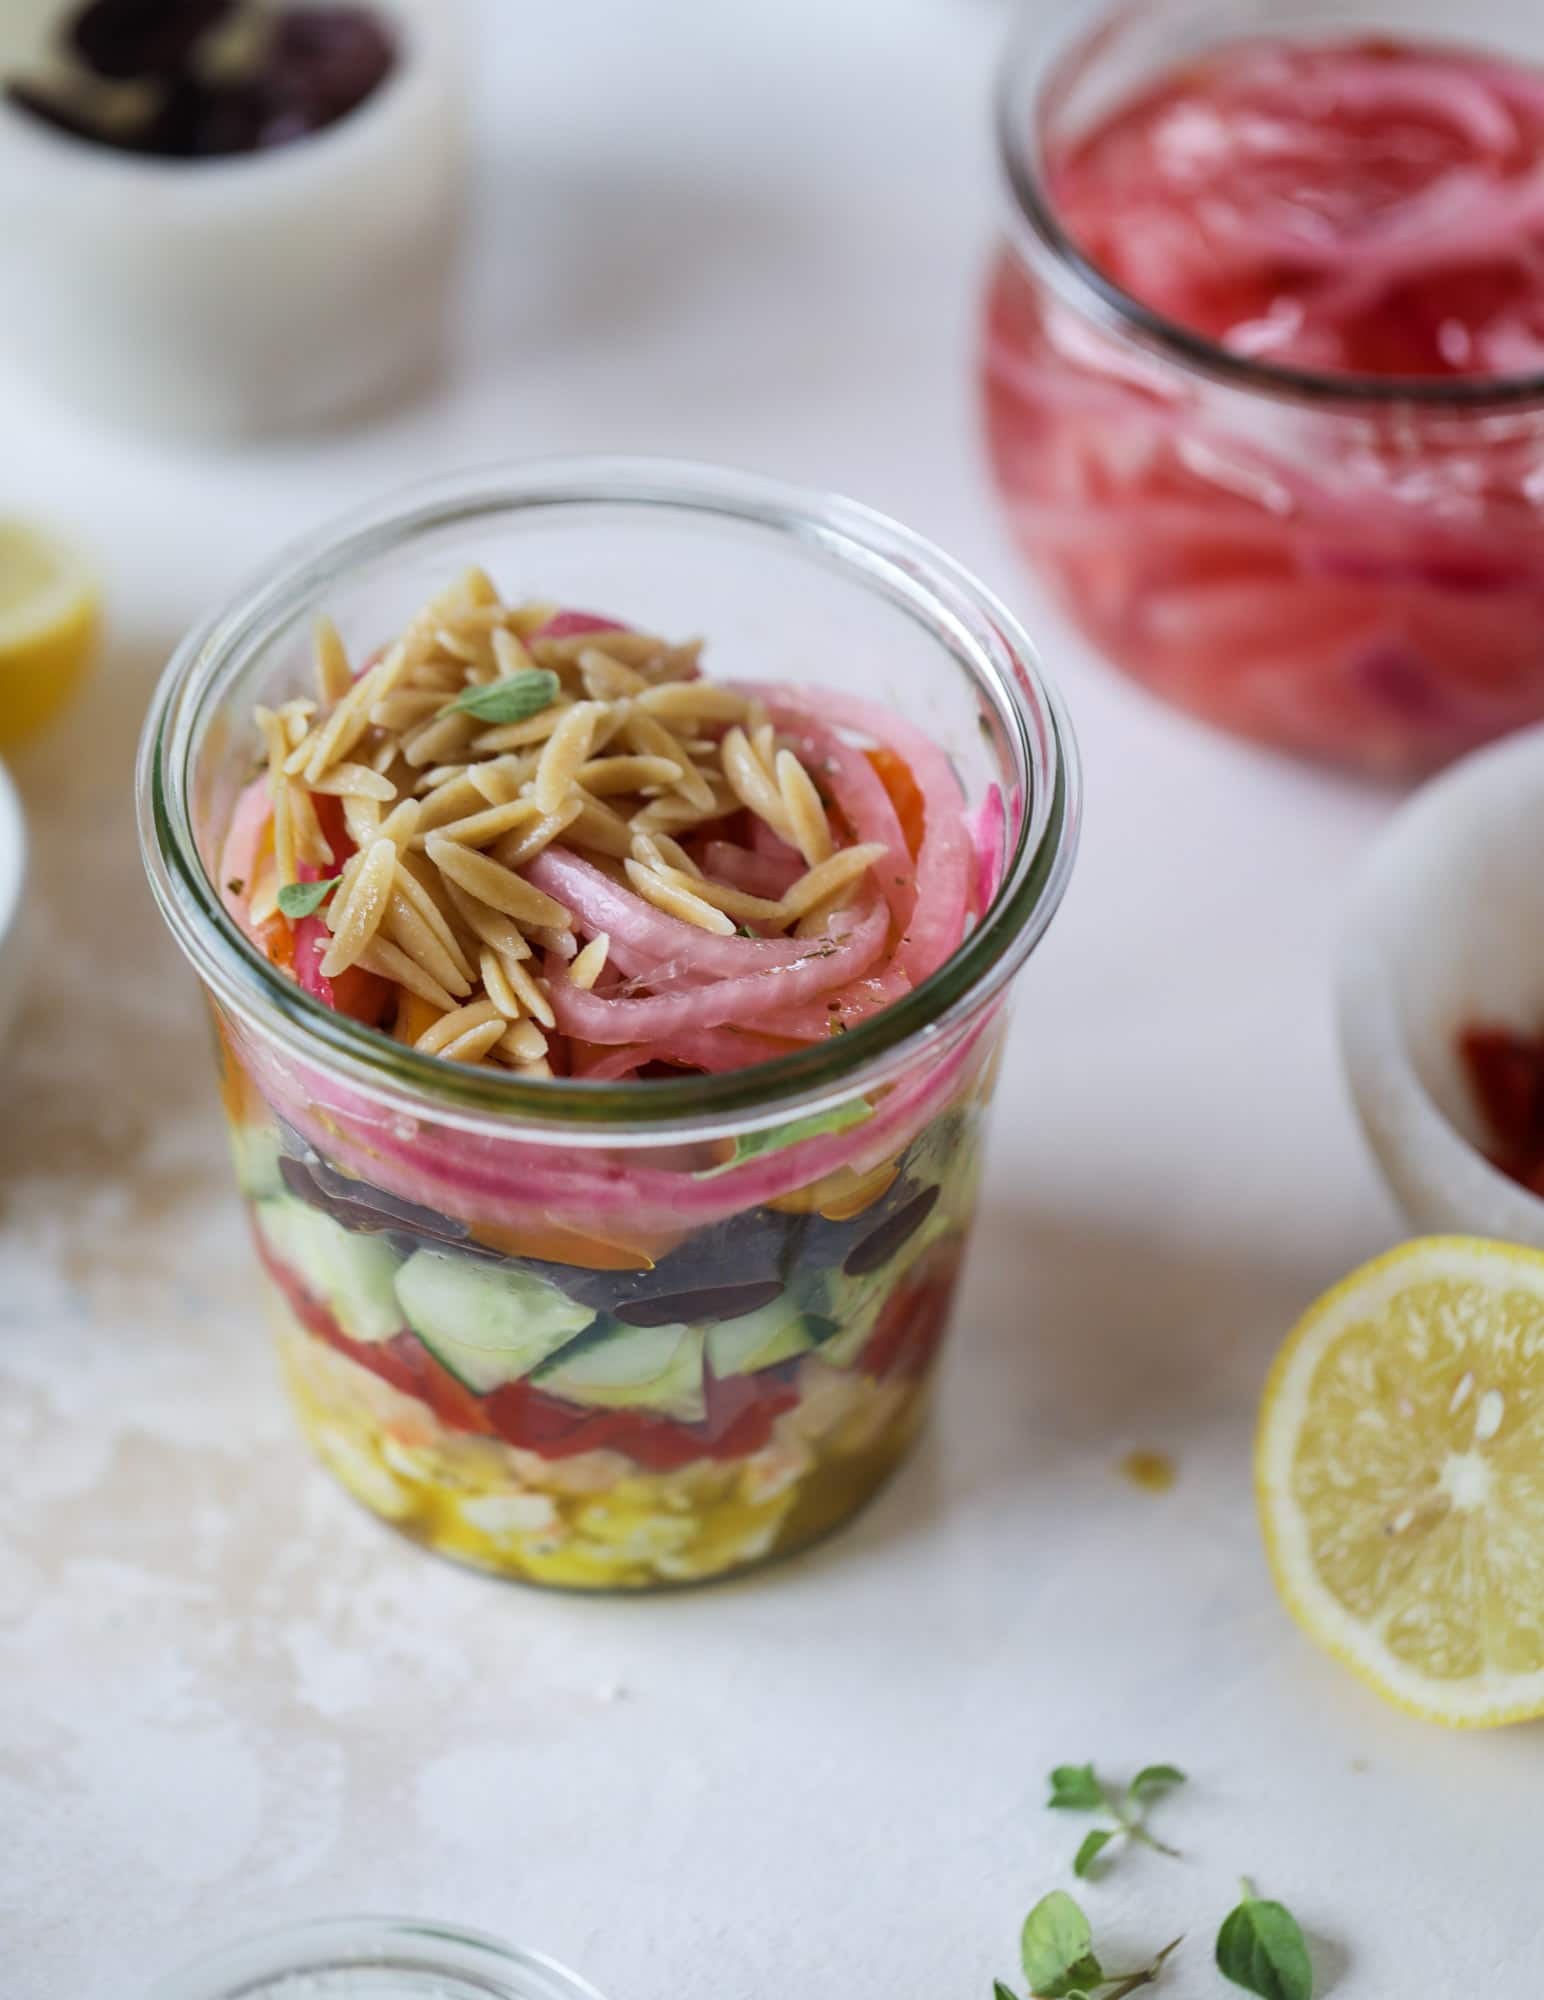 5 Mason Jar Salads To Meal Prep for a Week of Lunches - Jessica in